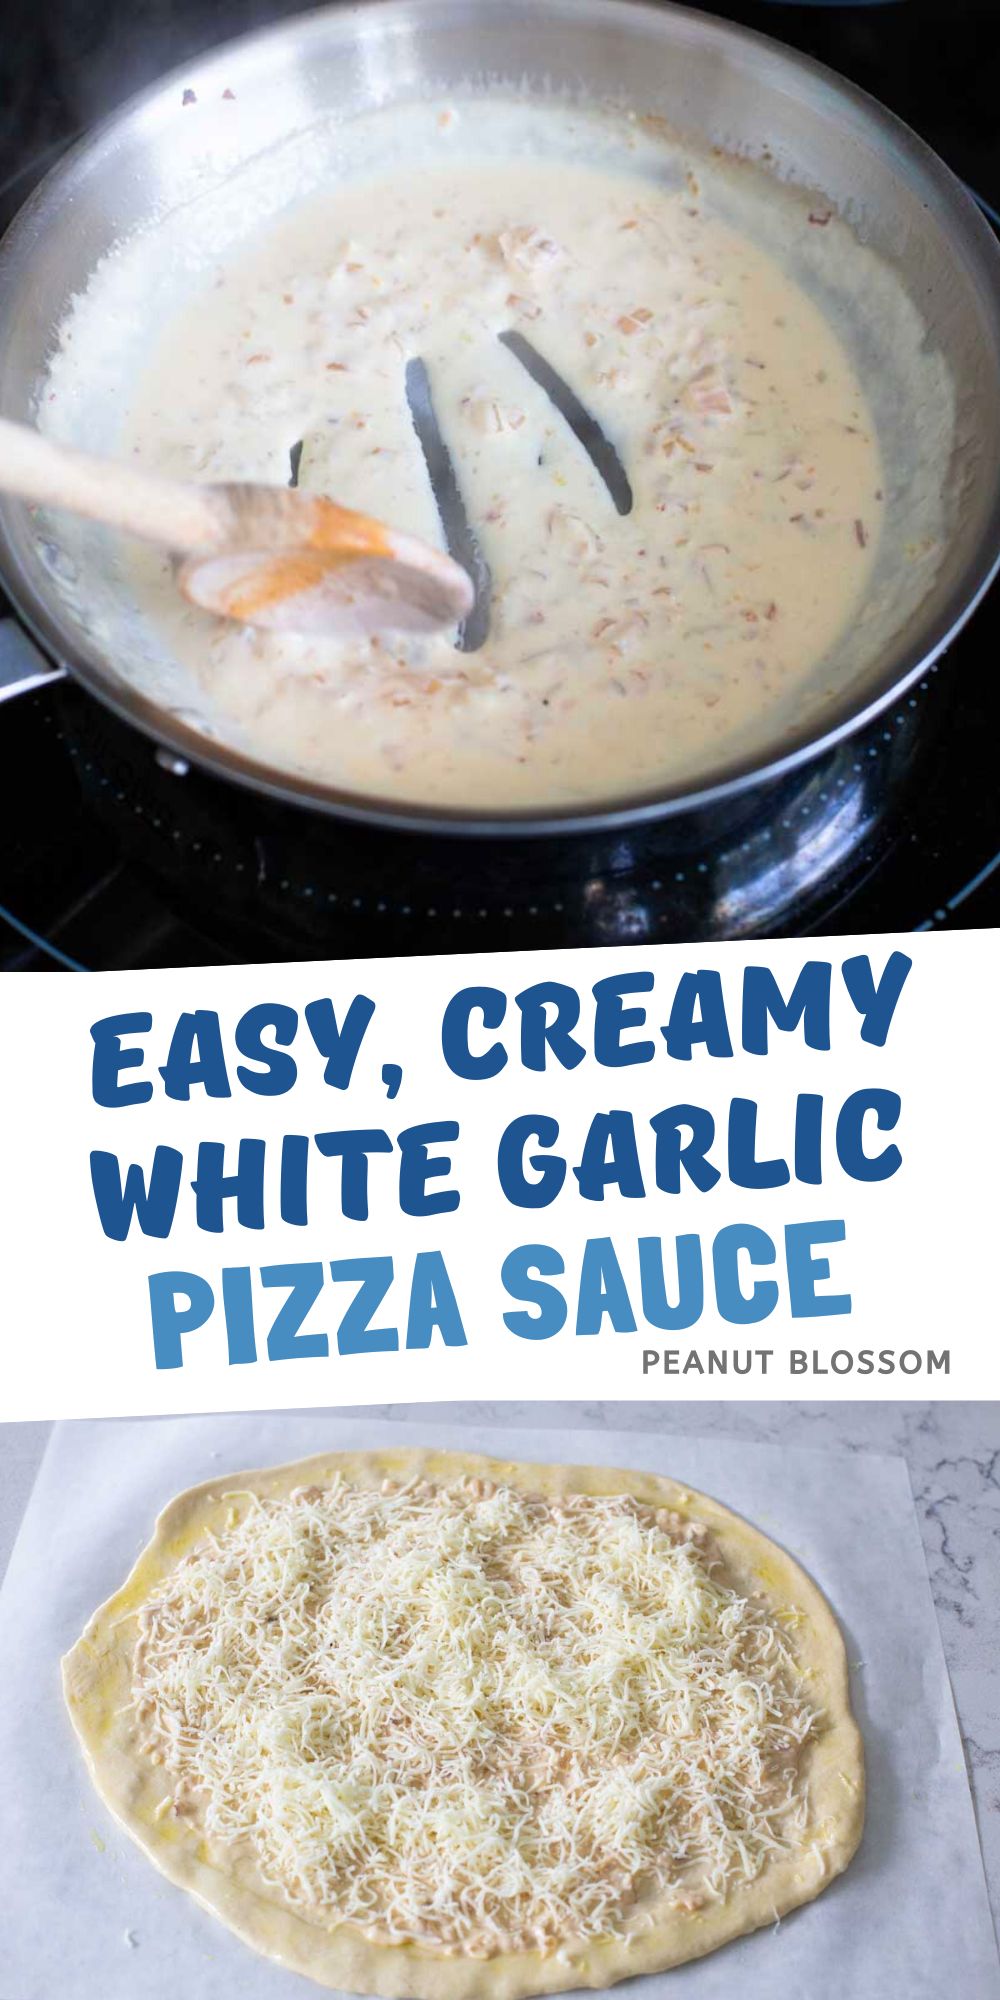 A saute pan filled with white garlic pizza sauce is being stirred by a spoon. A picture of a pizza with the sauce on the crust is below.